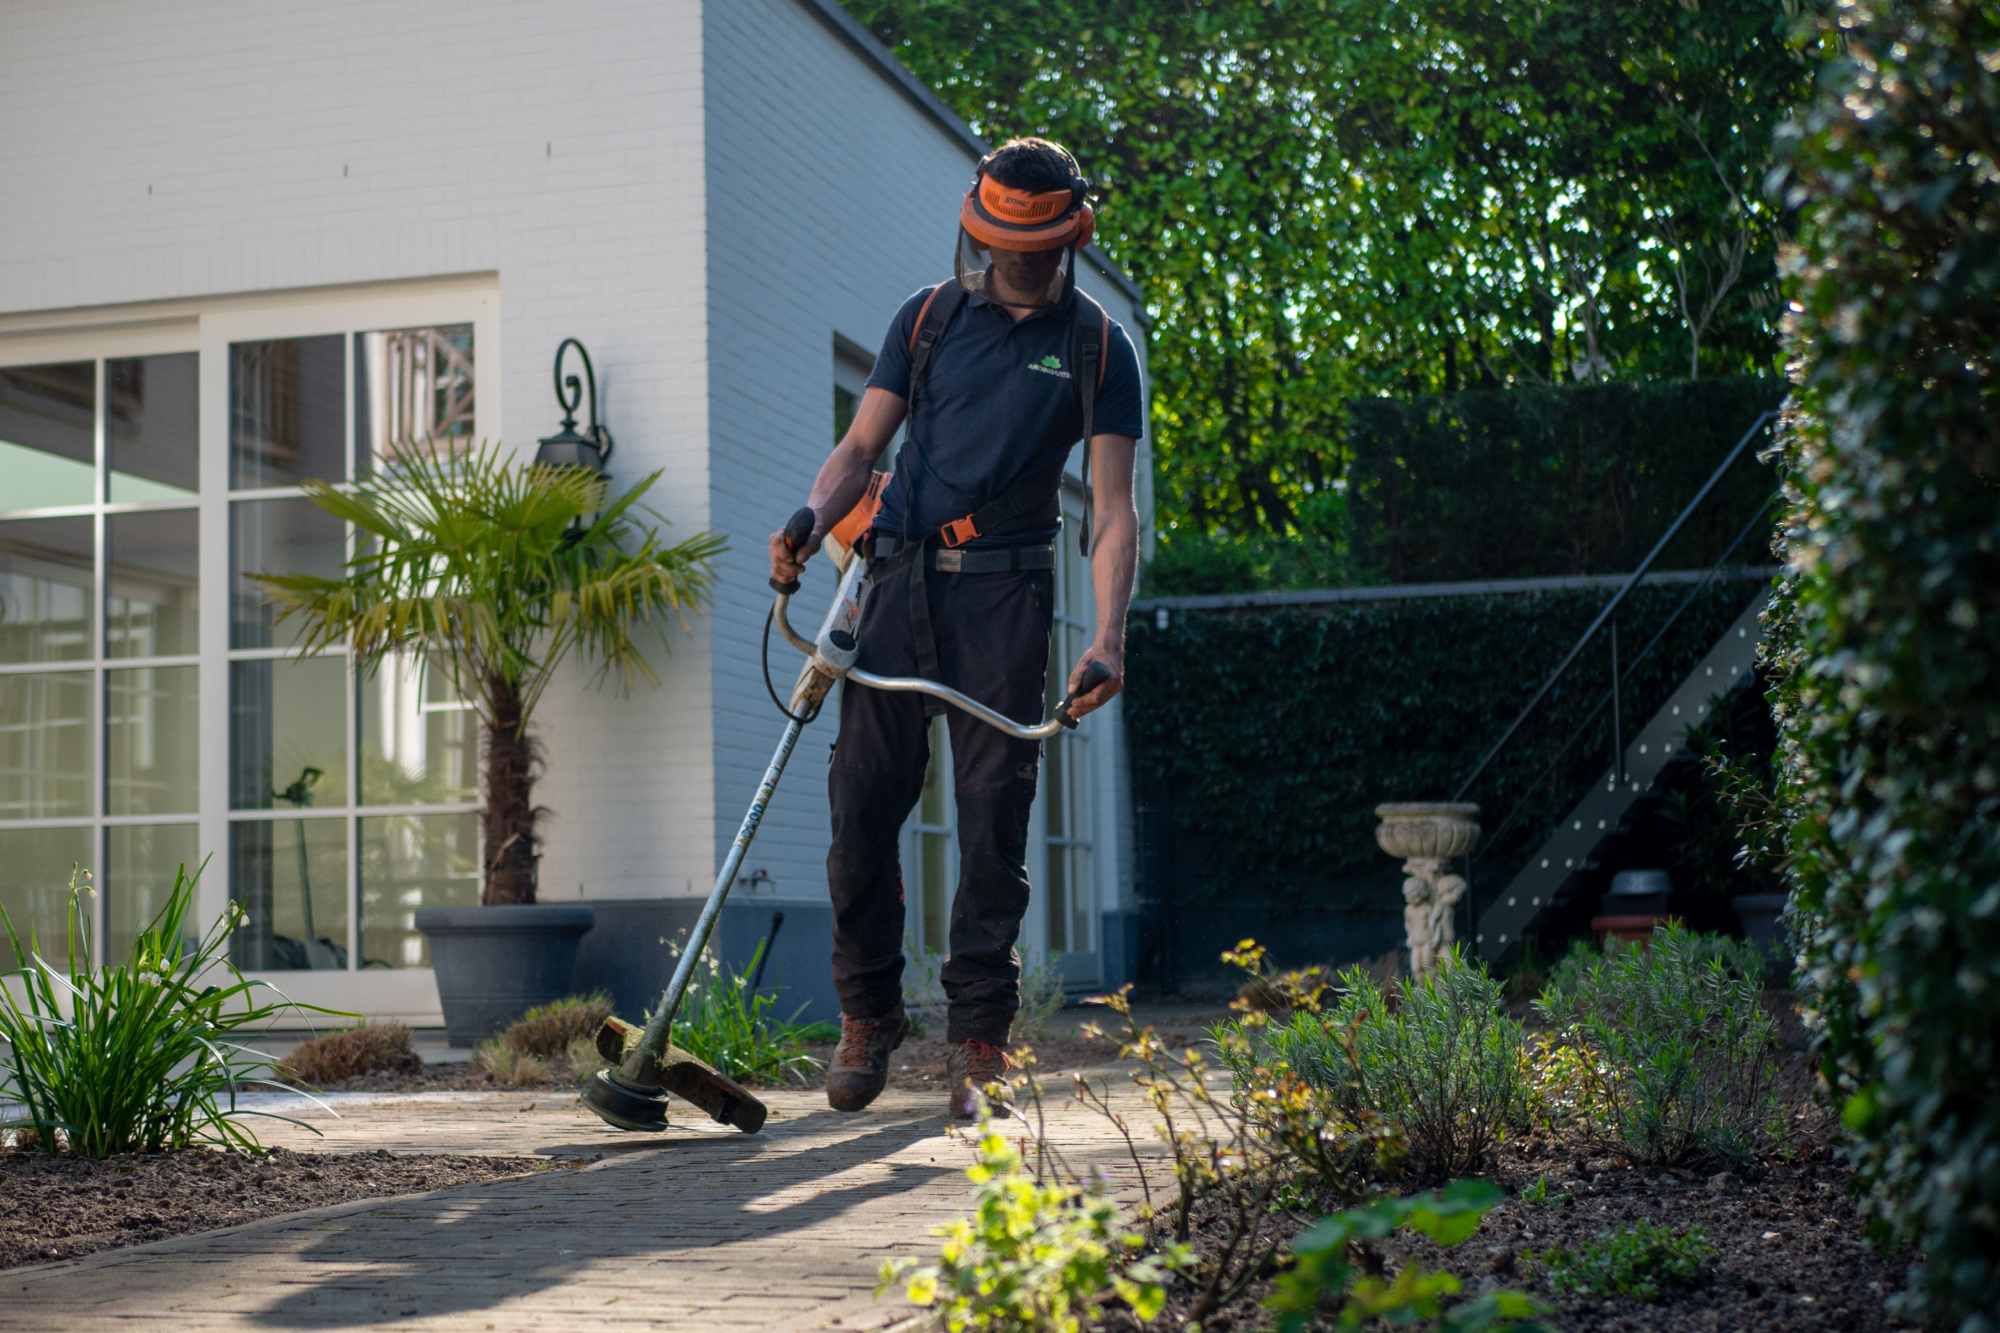 A gardener cutting the grass wearing protective equipment